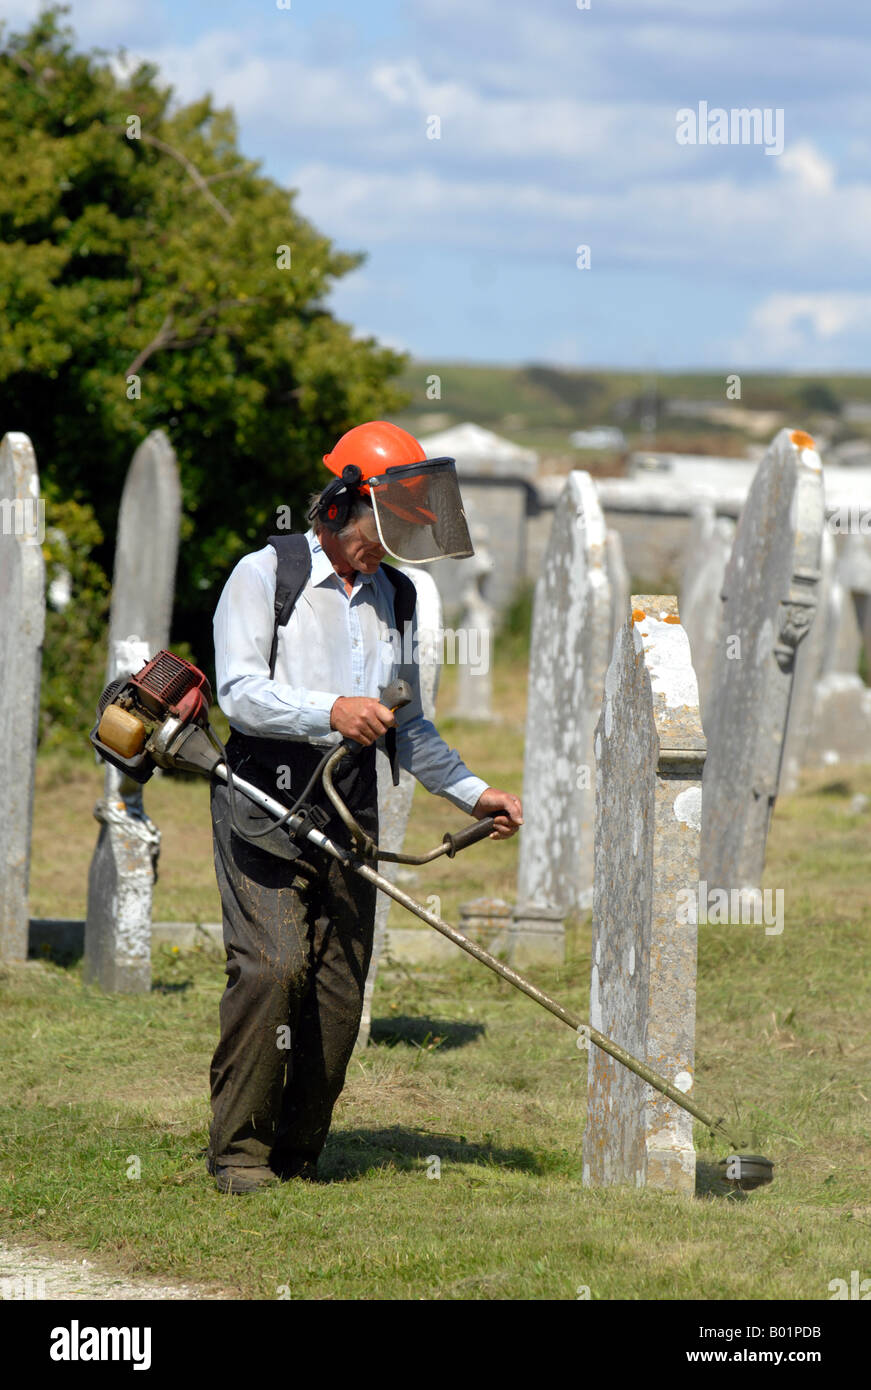 Workman cuts grass in a cemetery Stock Photo